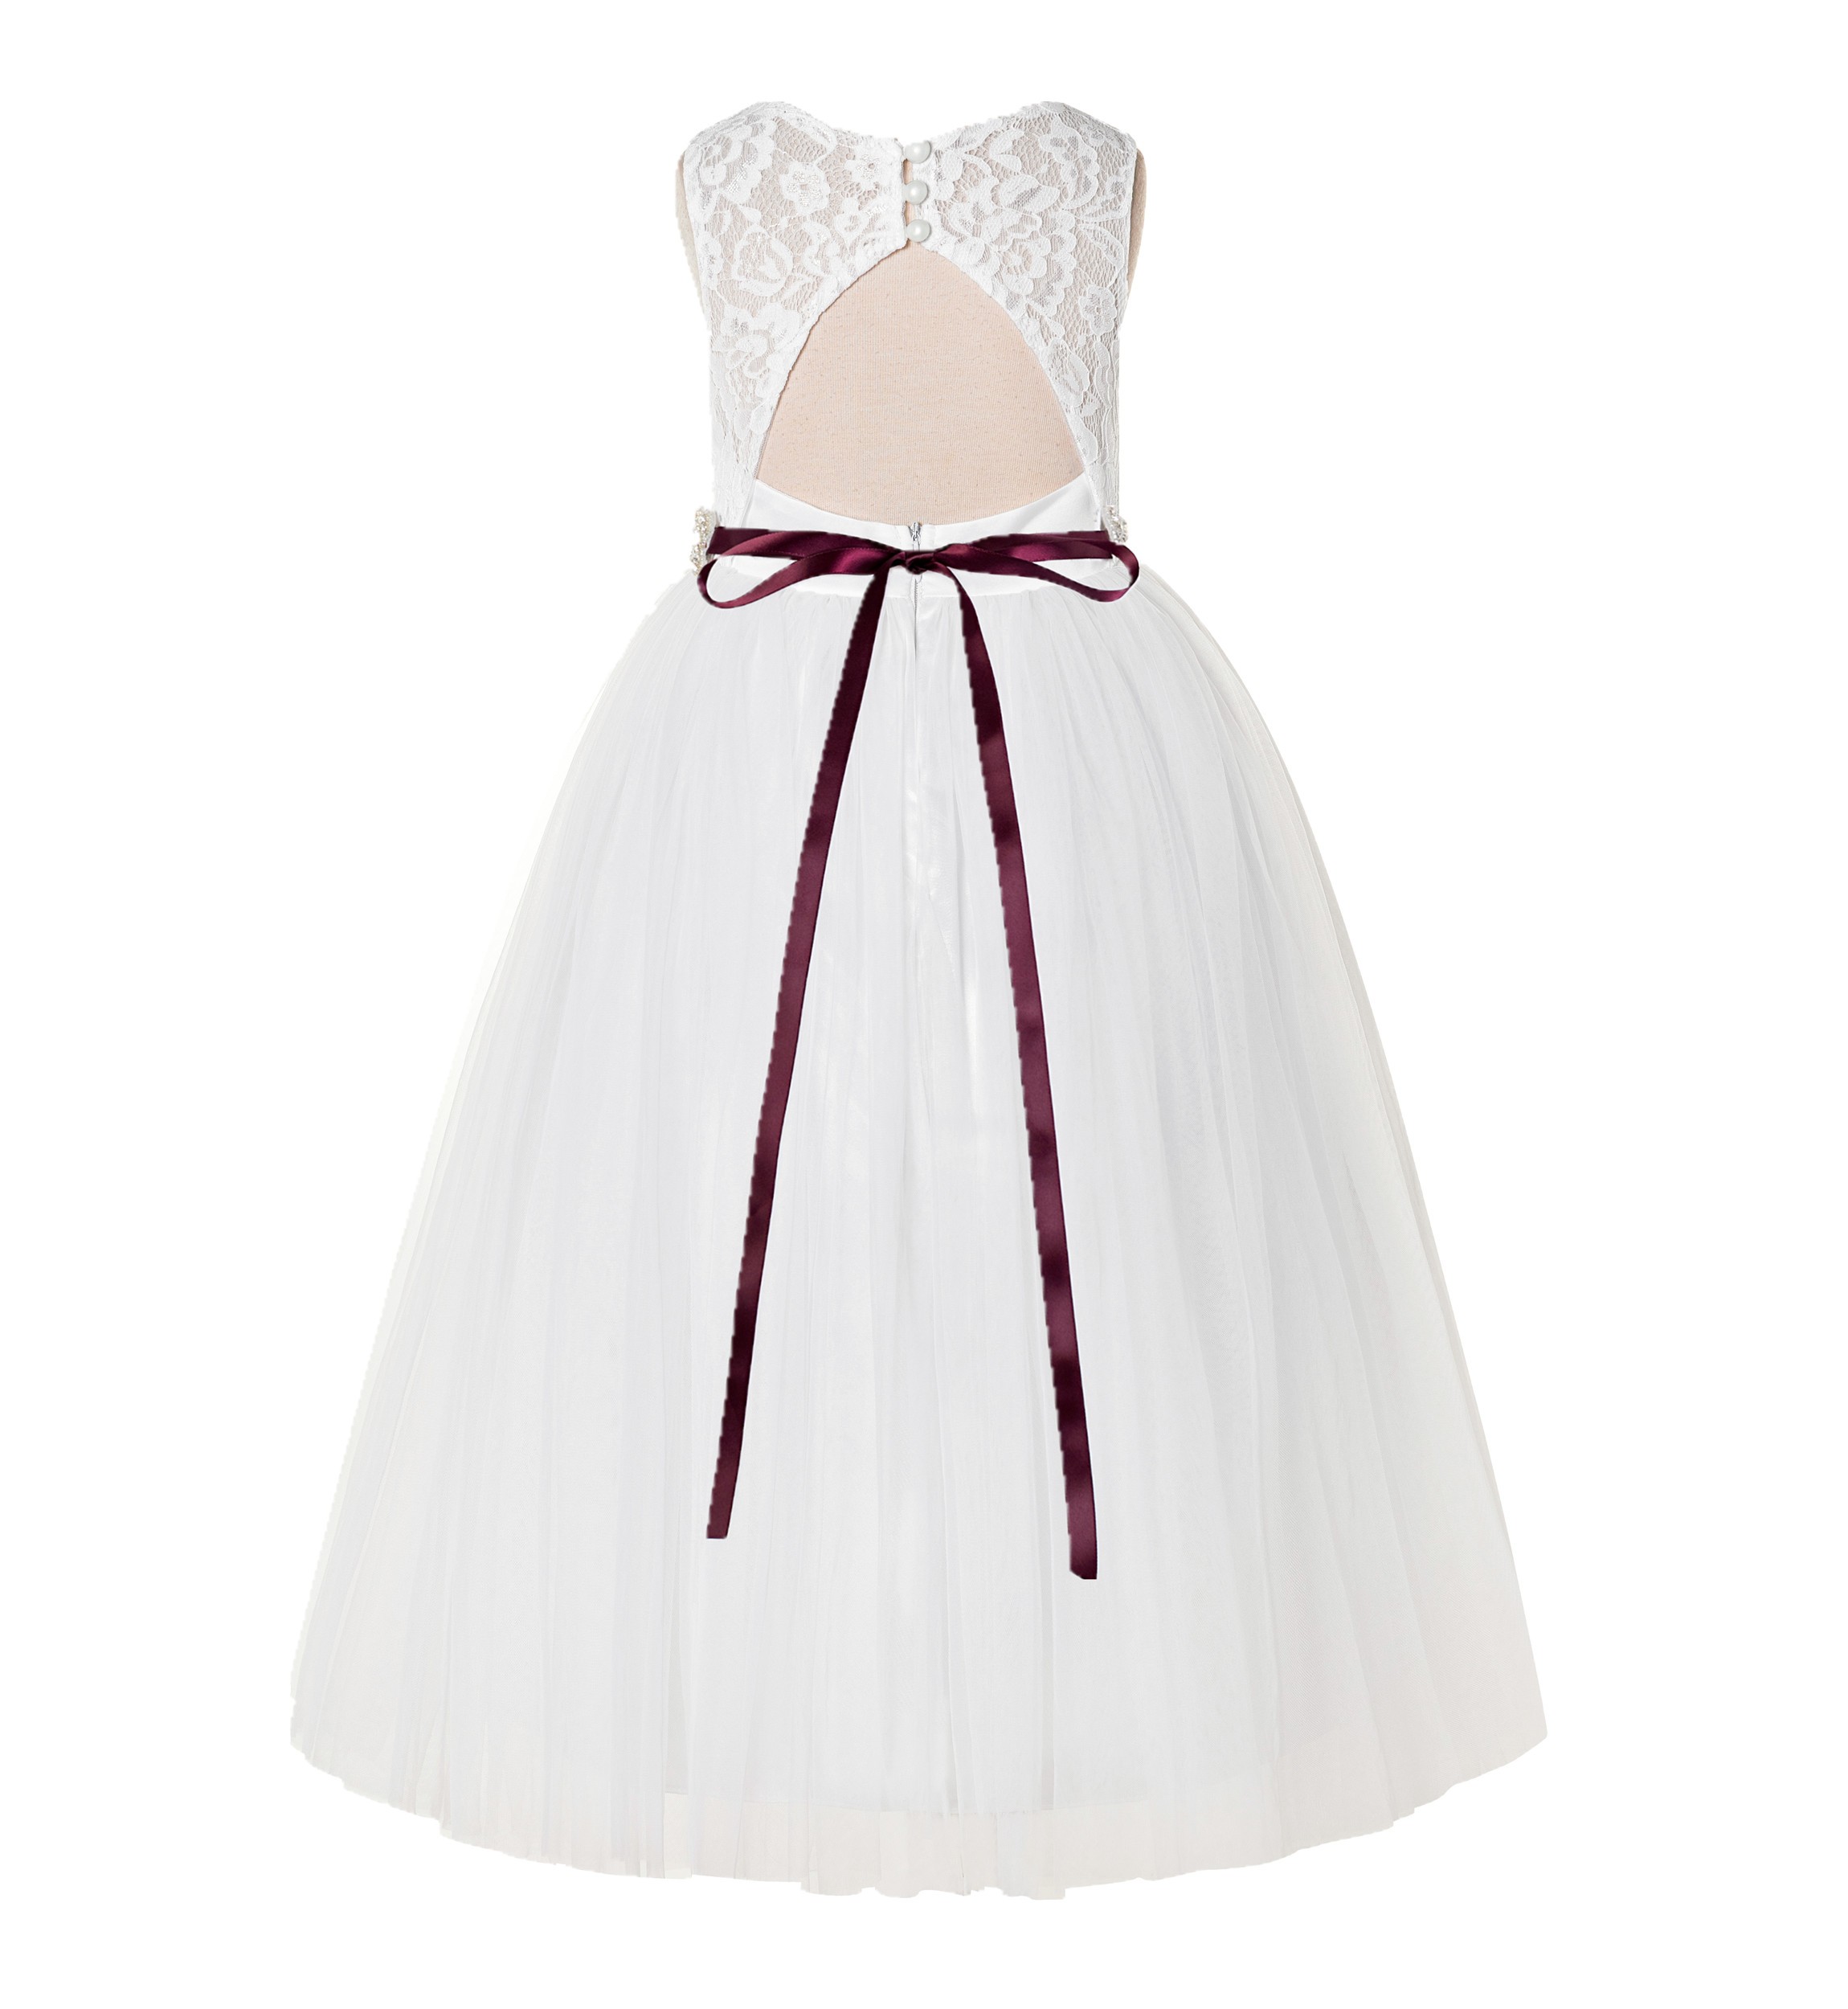 Ivory / Burgundy A-Line Tulle Lace Flower Girl Dress 178R2